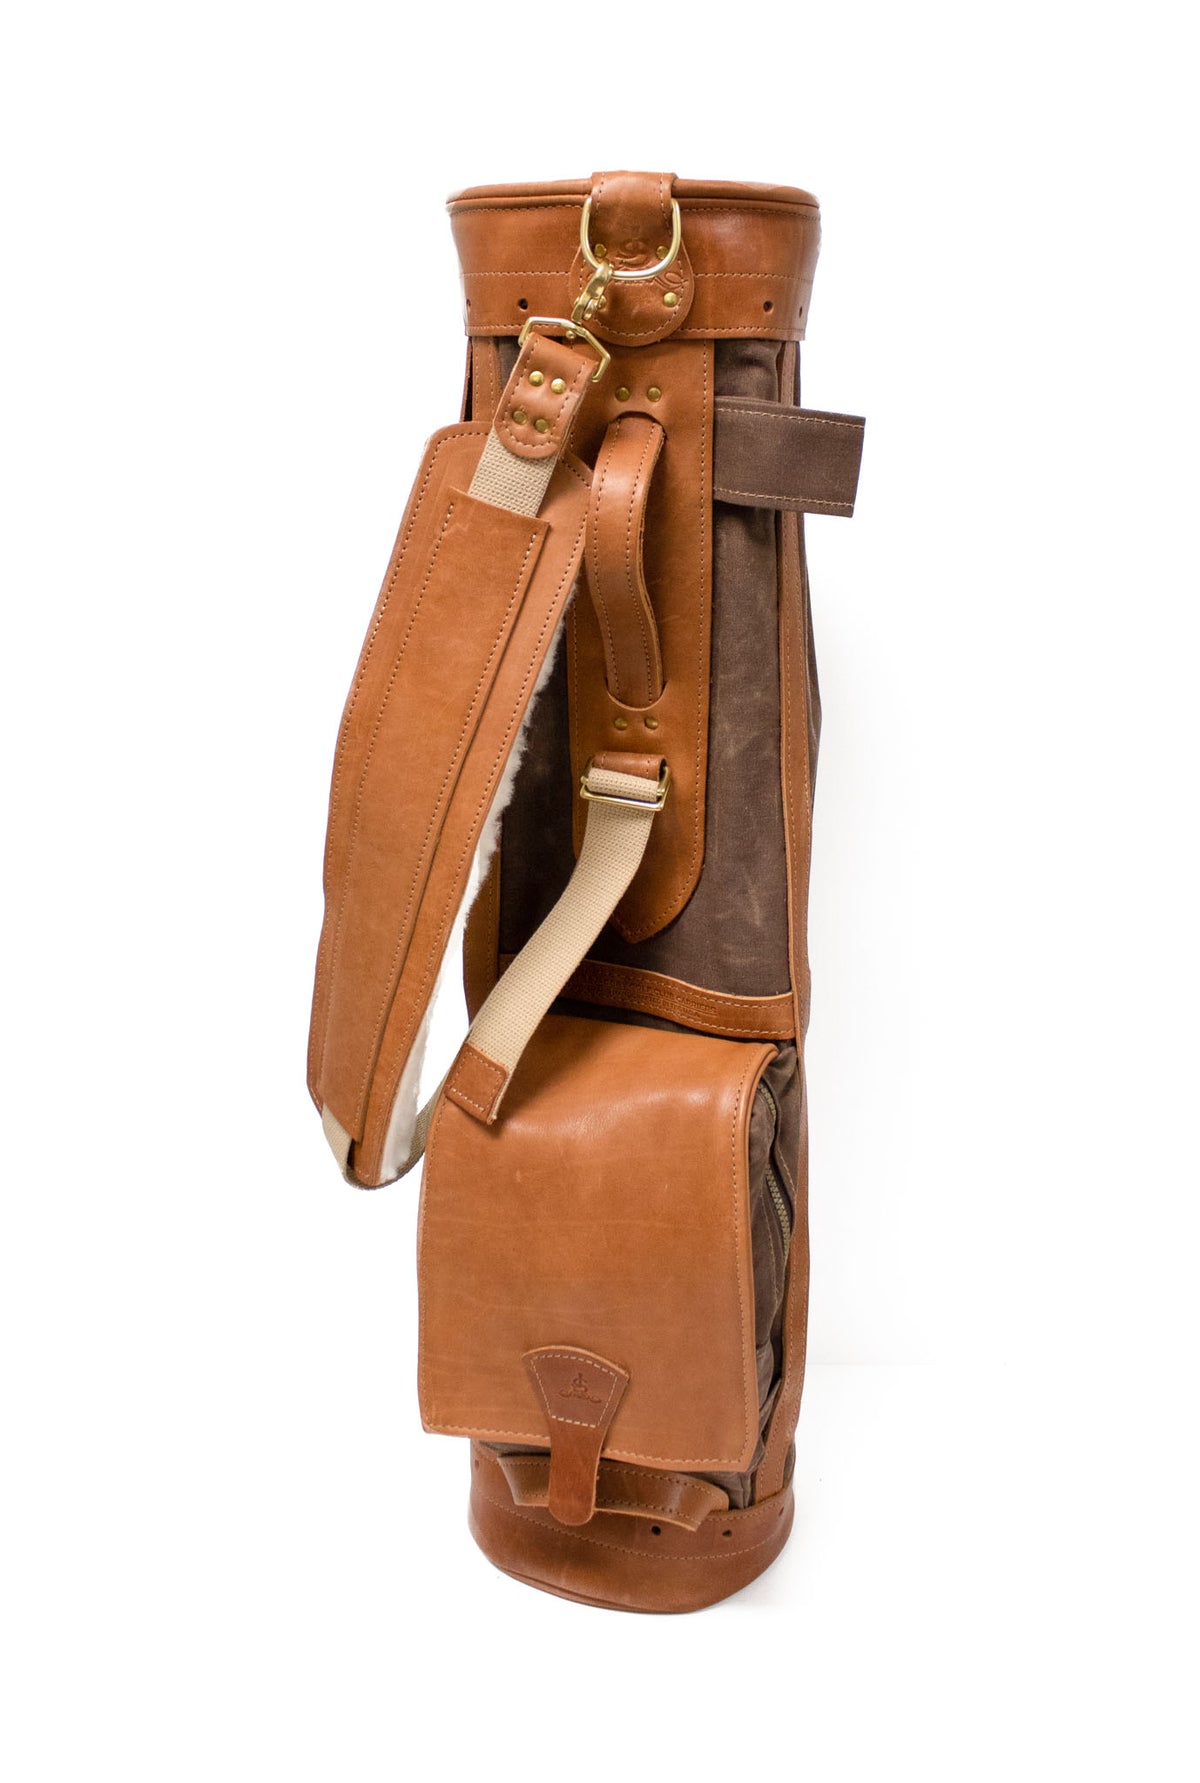 Bourbon Sunday Style Golf Bag with Natural Leather Ball Pocket Flap- Steurer & Jacoby 